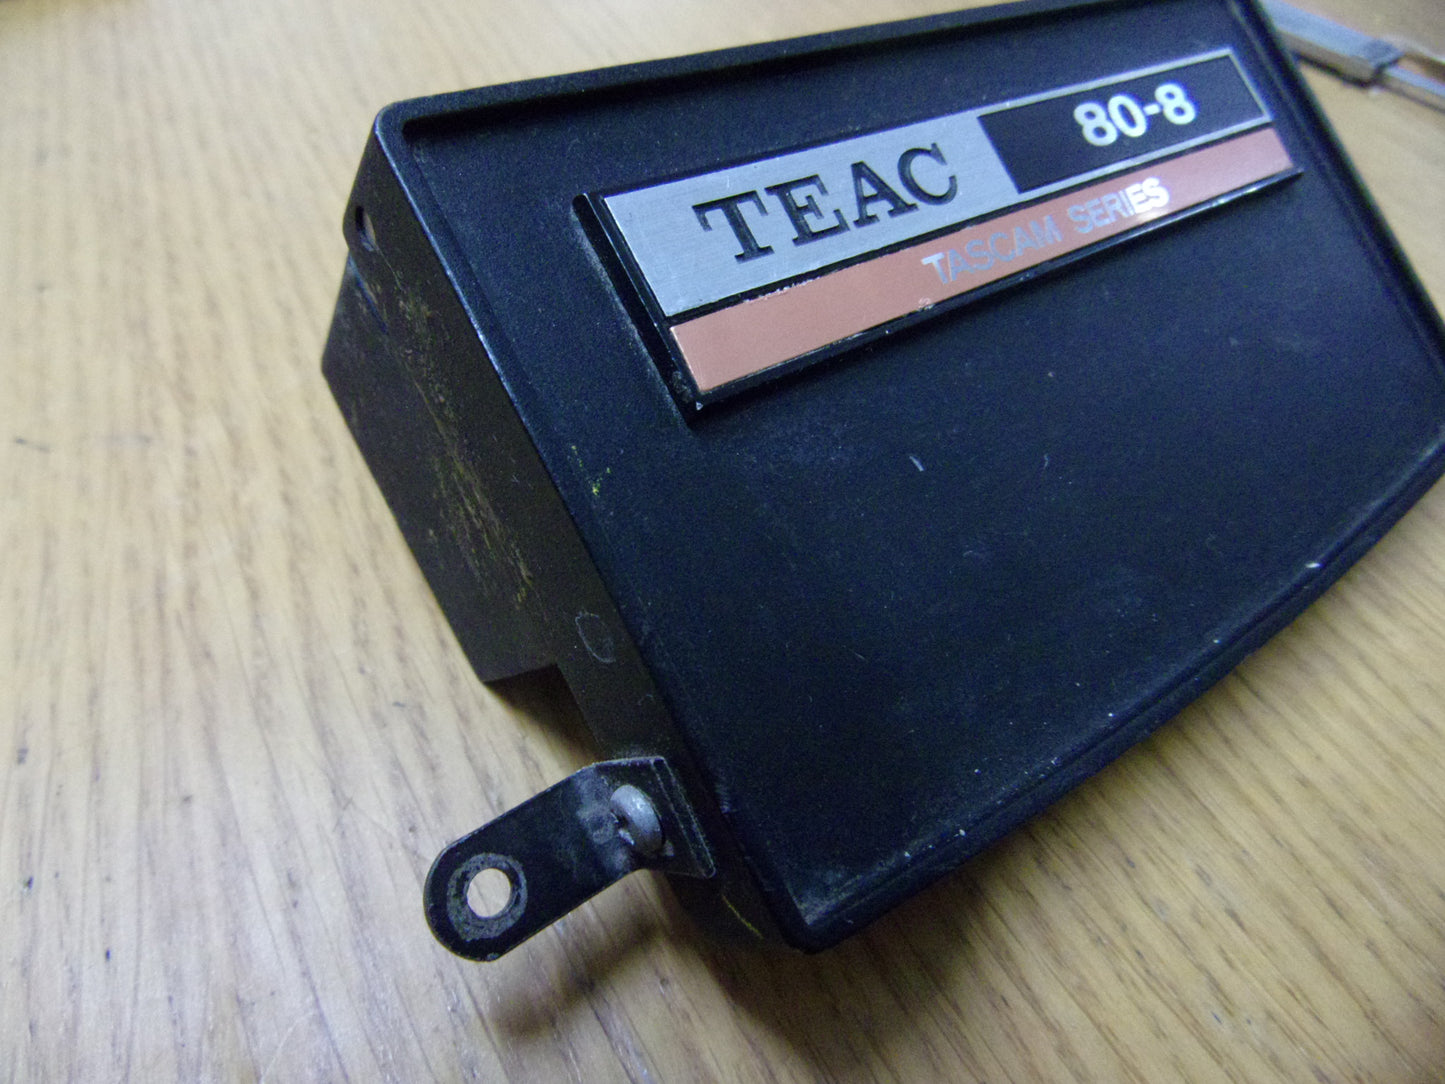 Teac 80-8 Head cover with side clip